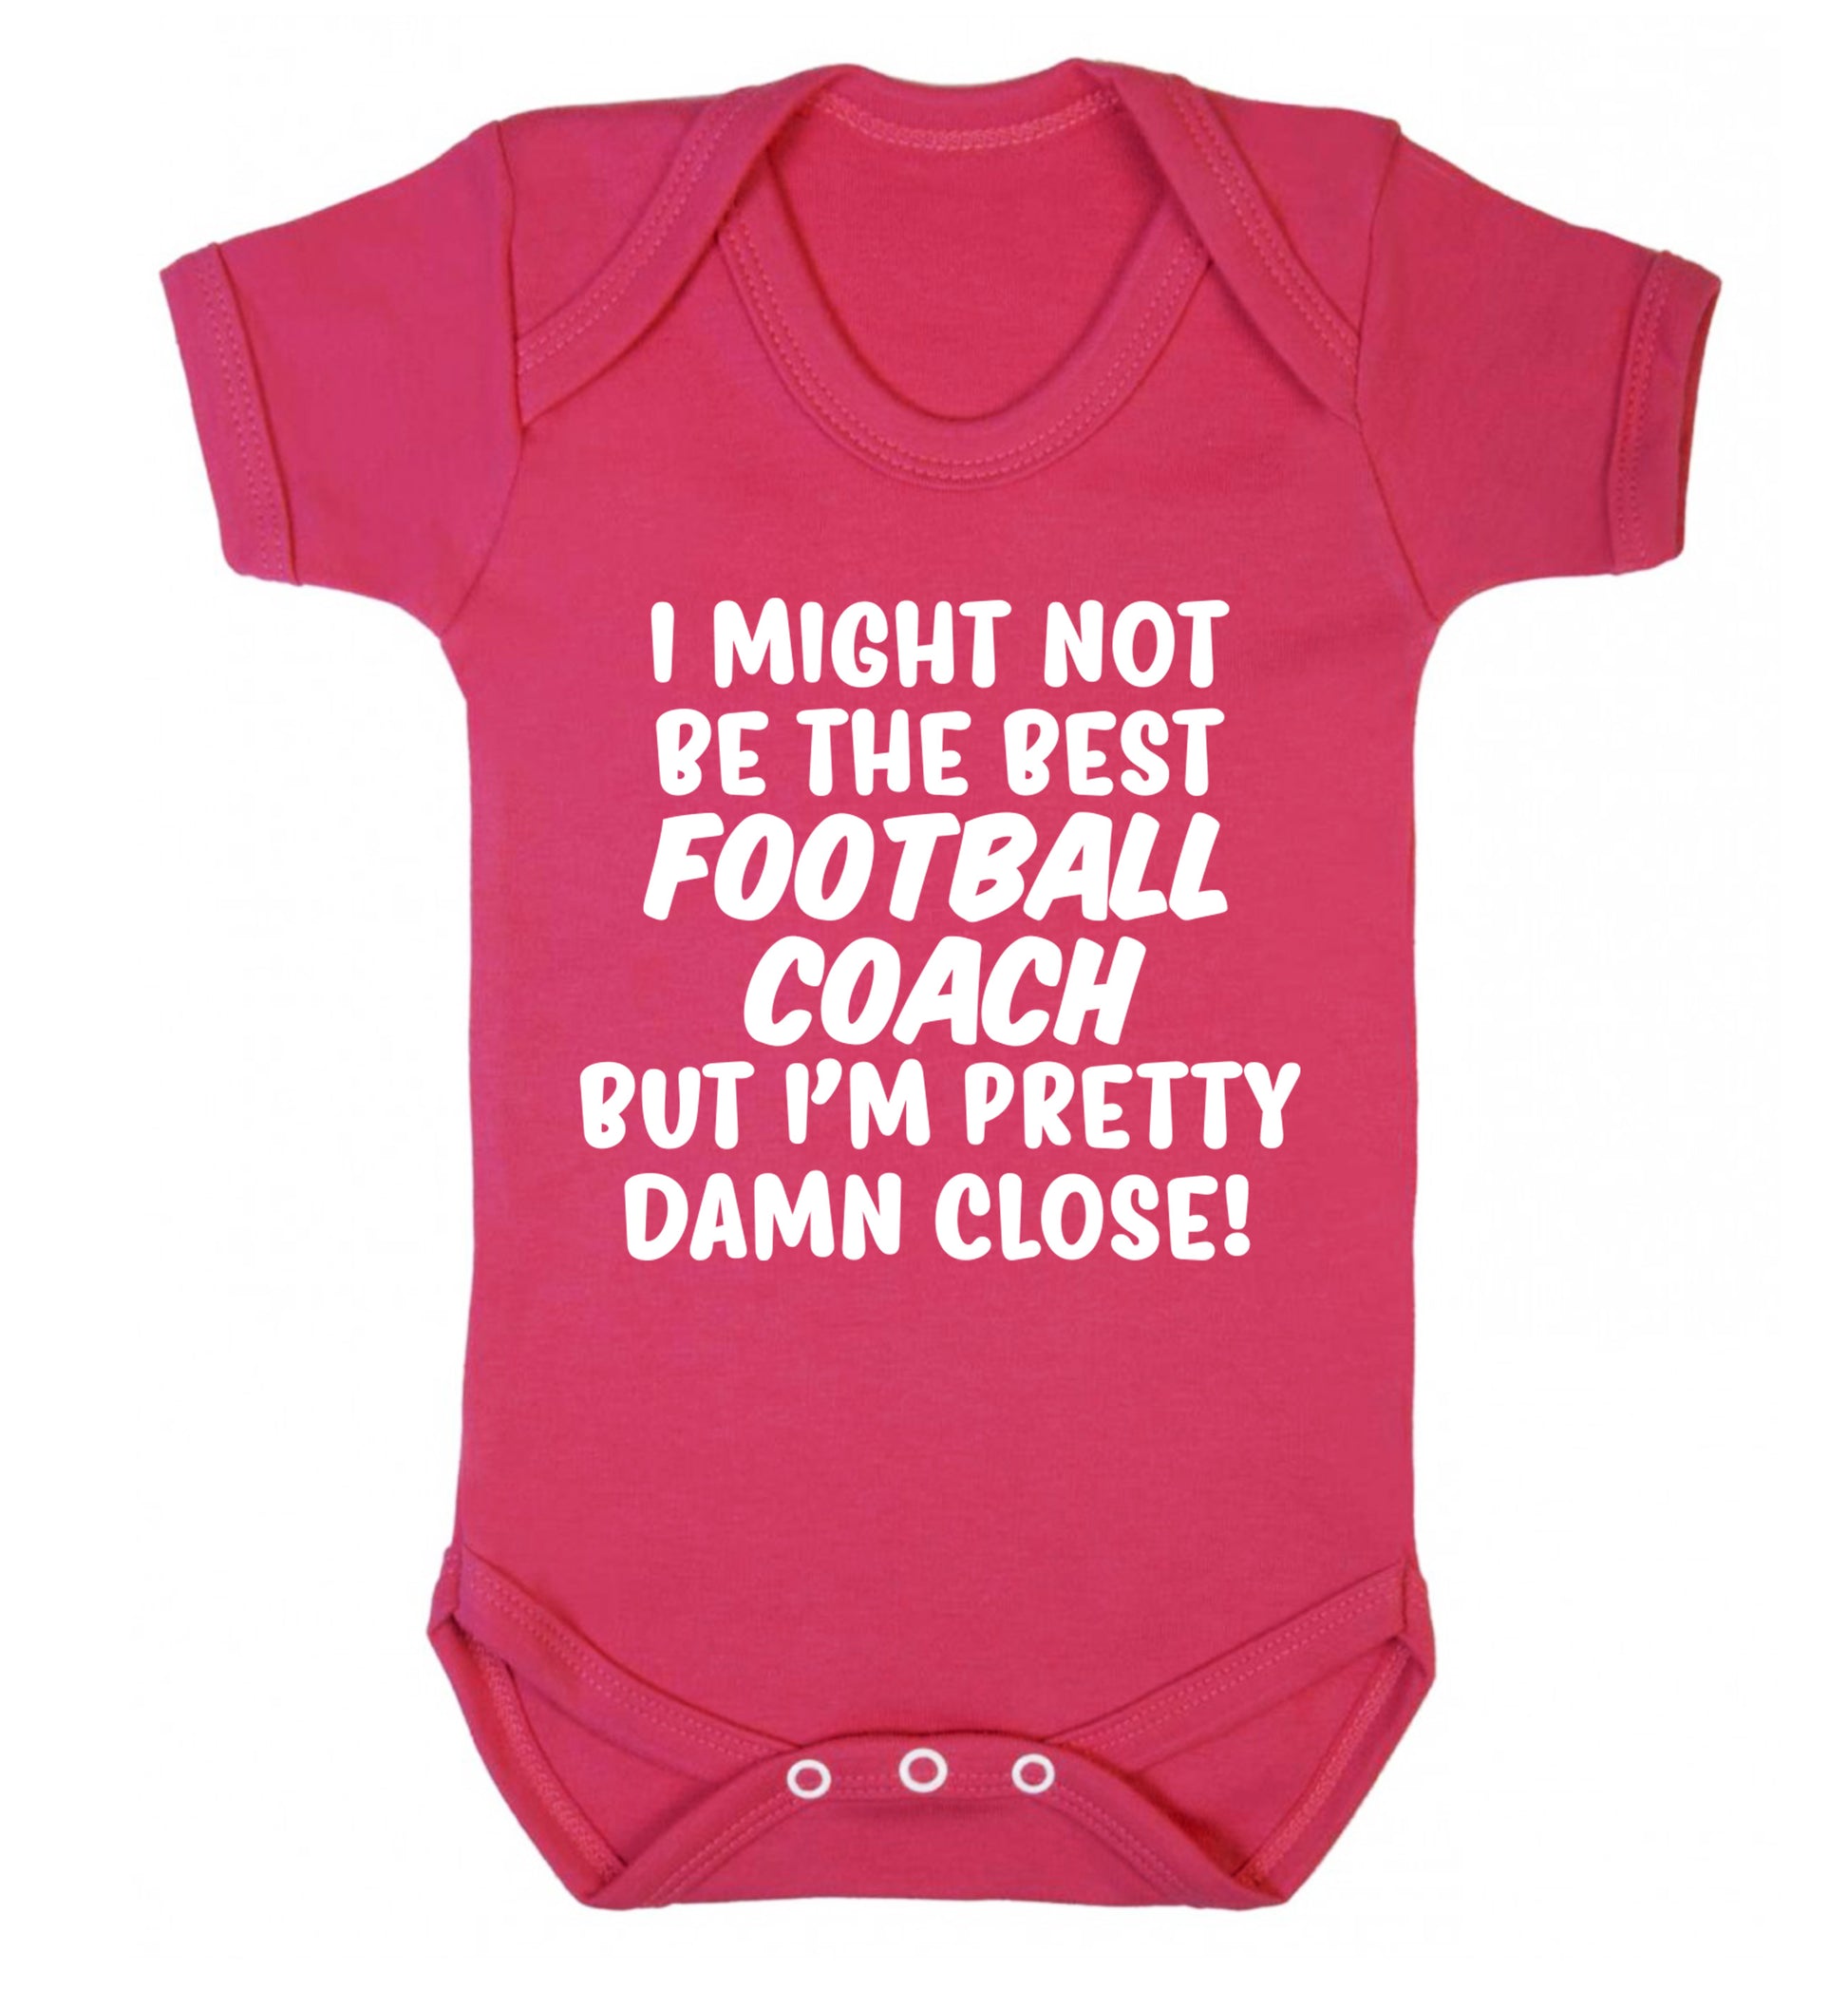 I might not be the best football coach but I'm pretty close! Baby Vest dark pink 18-24 months